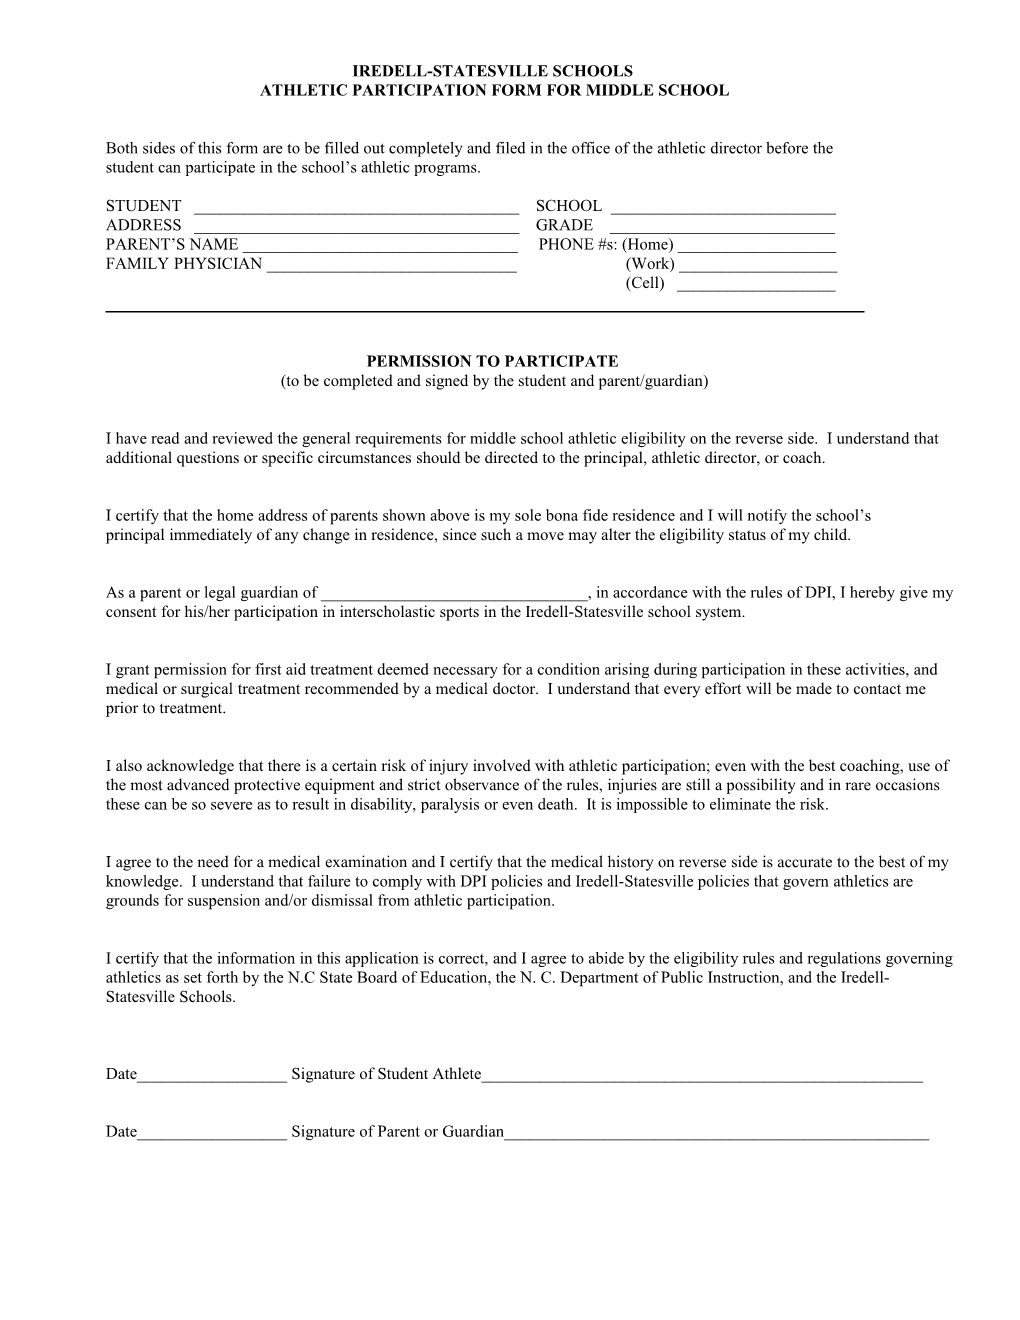 Iredell-Statesville Schools Athletic Participation Form